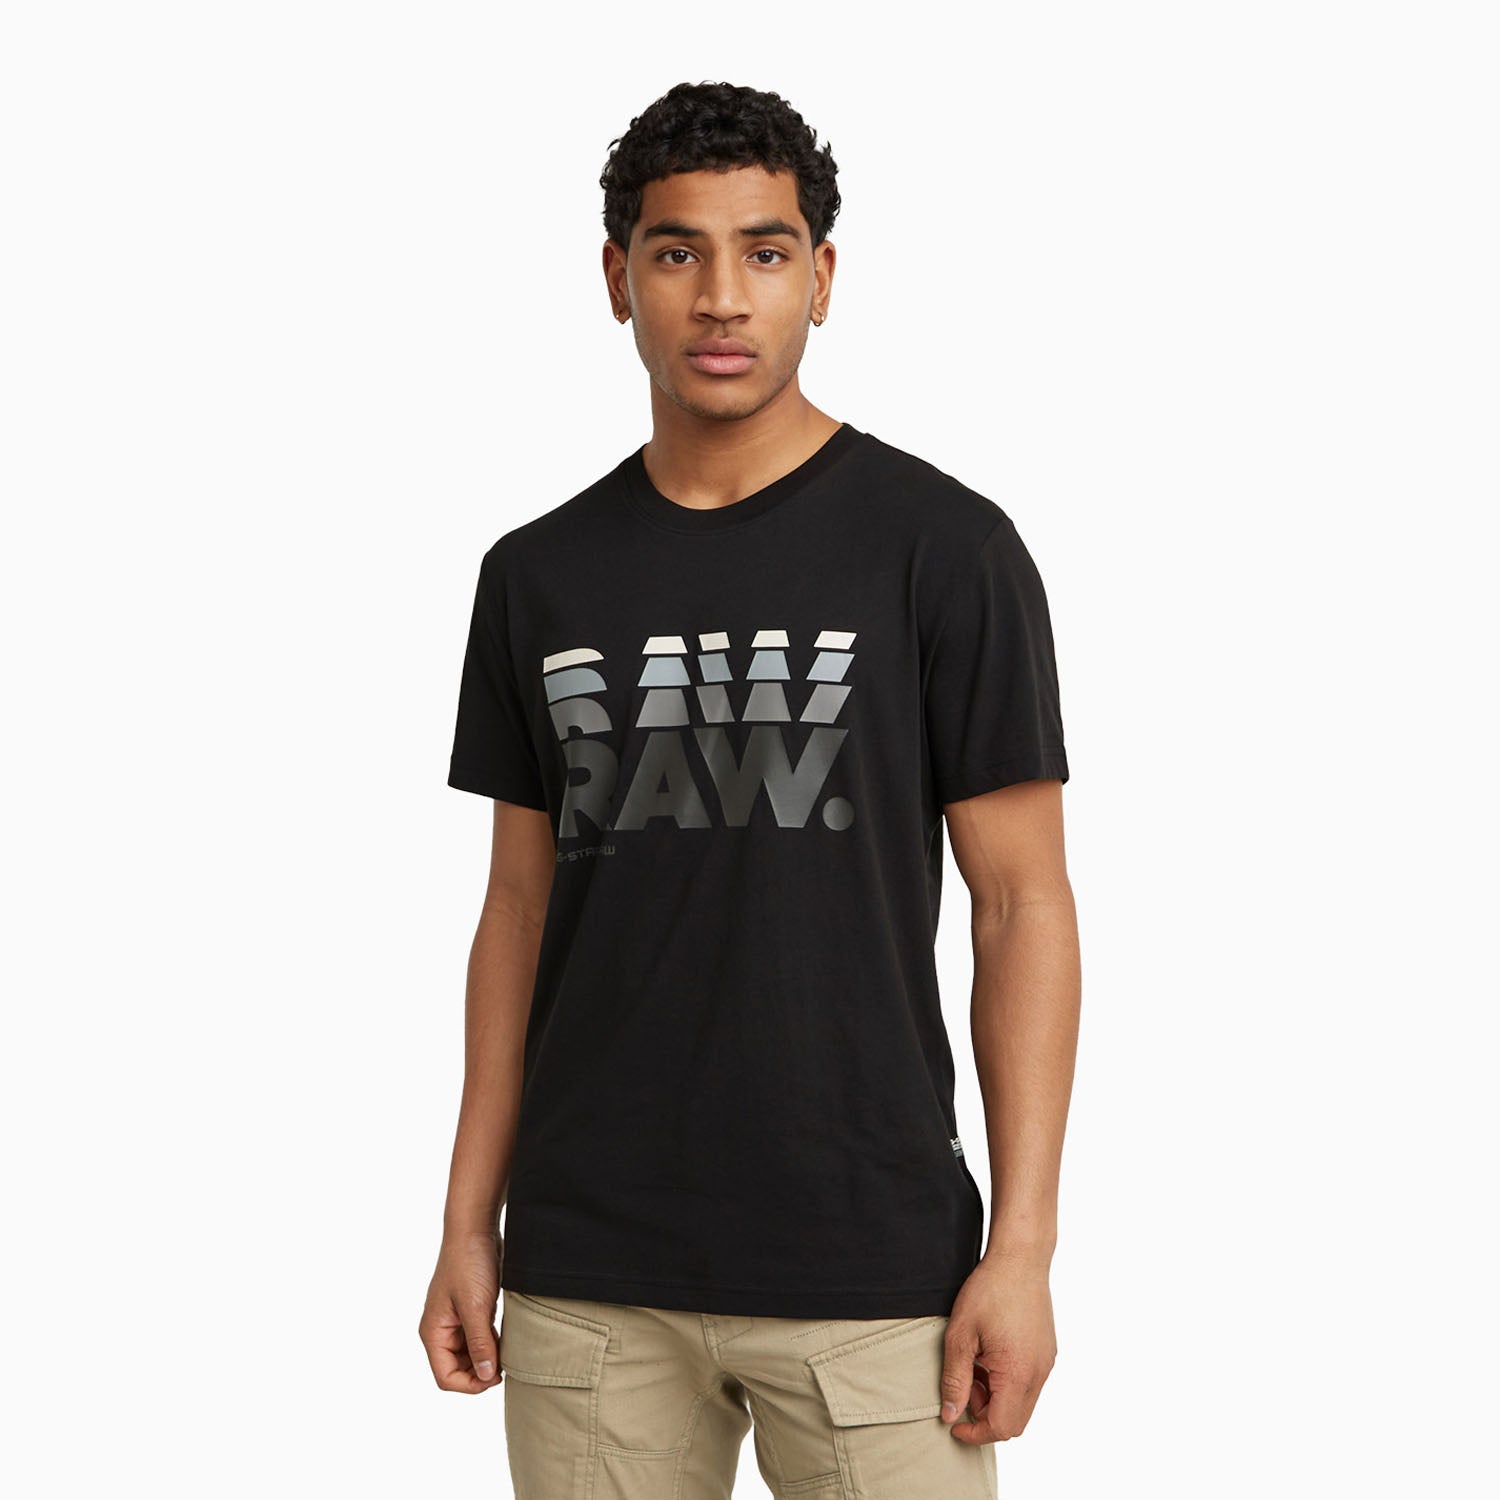 g-star-raw-mens-raw-graphic-crew-neck-t-shirt-d25497-336-6484